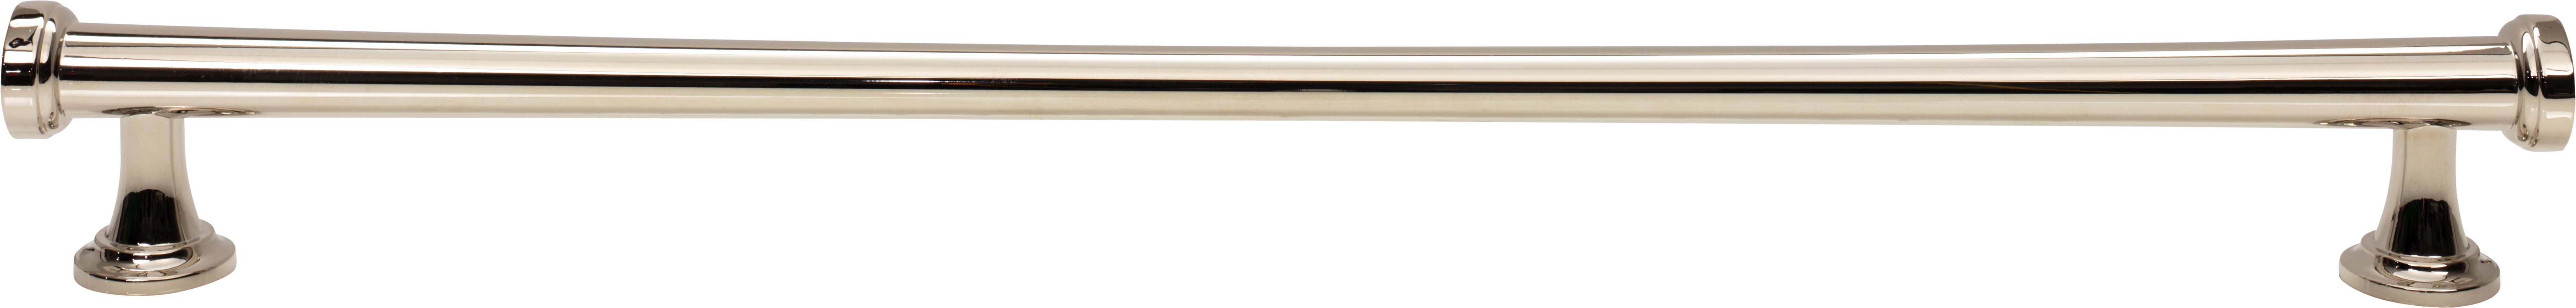 Browning Appliance Pull 18 Inch